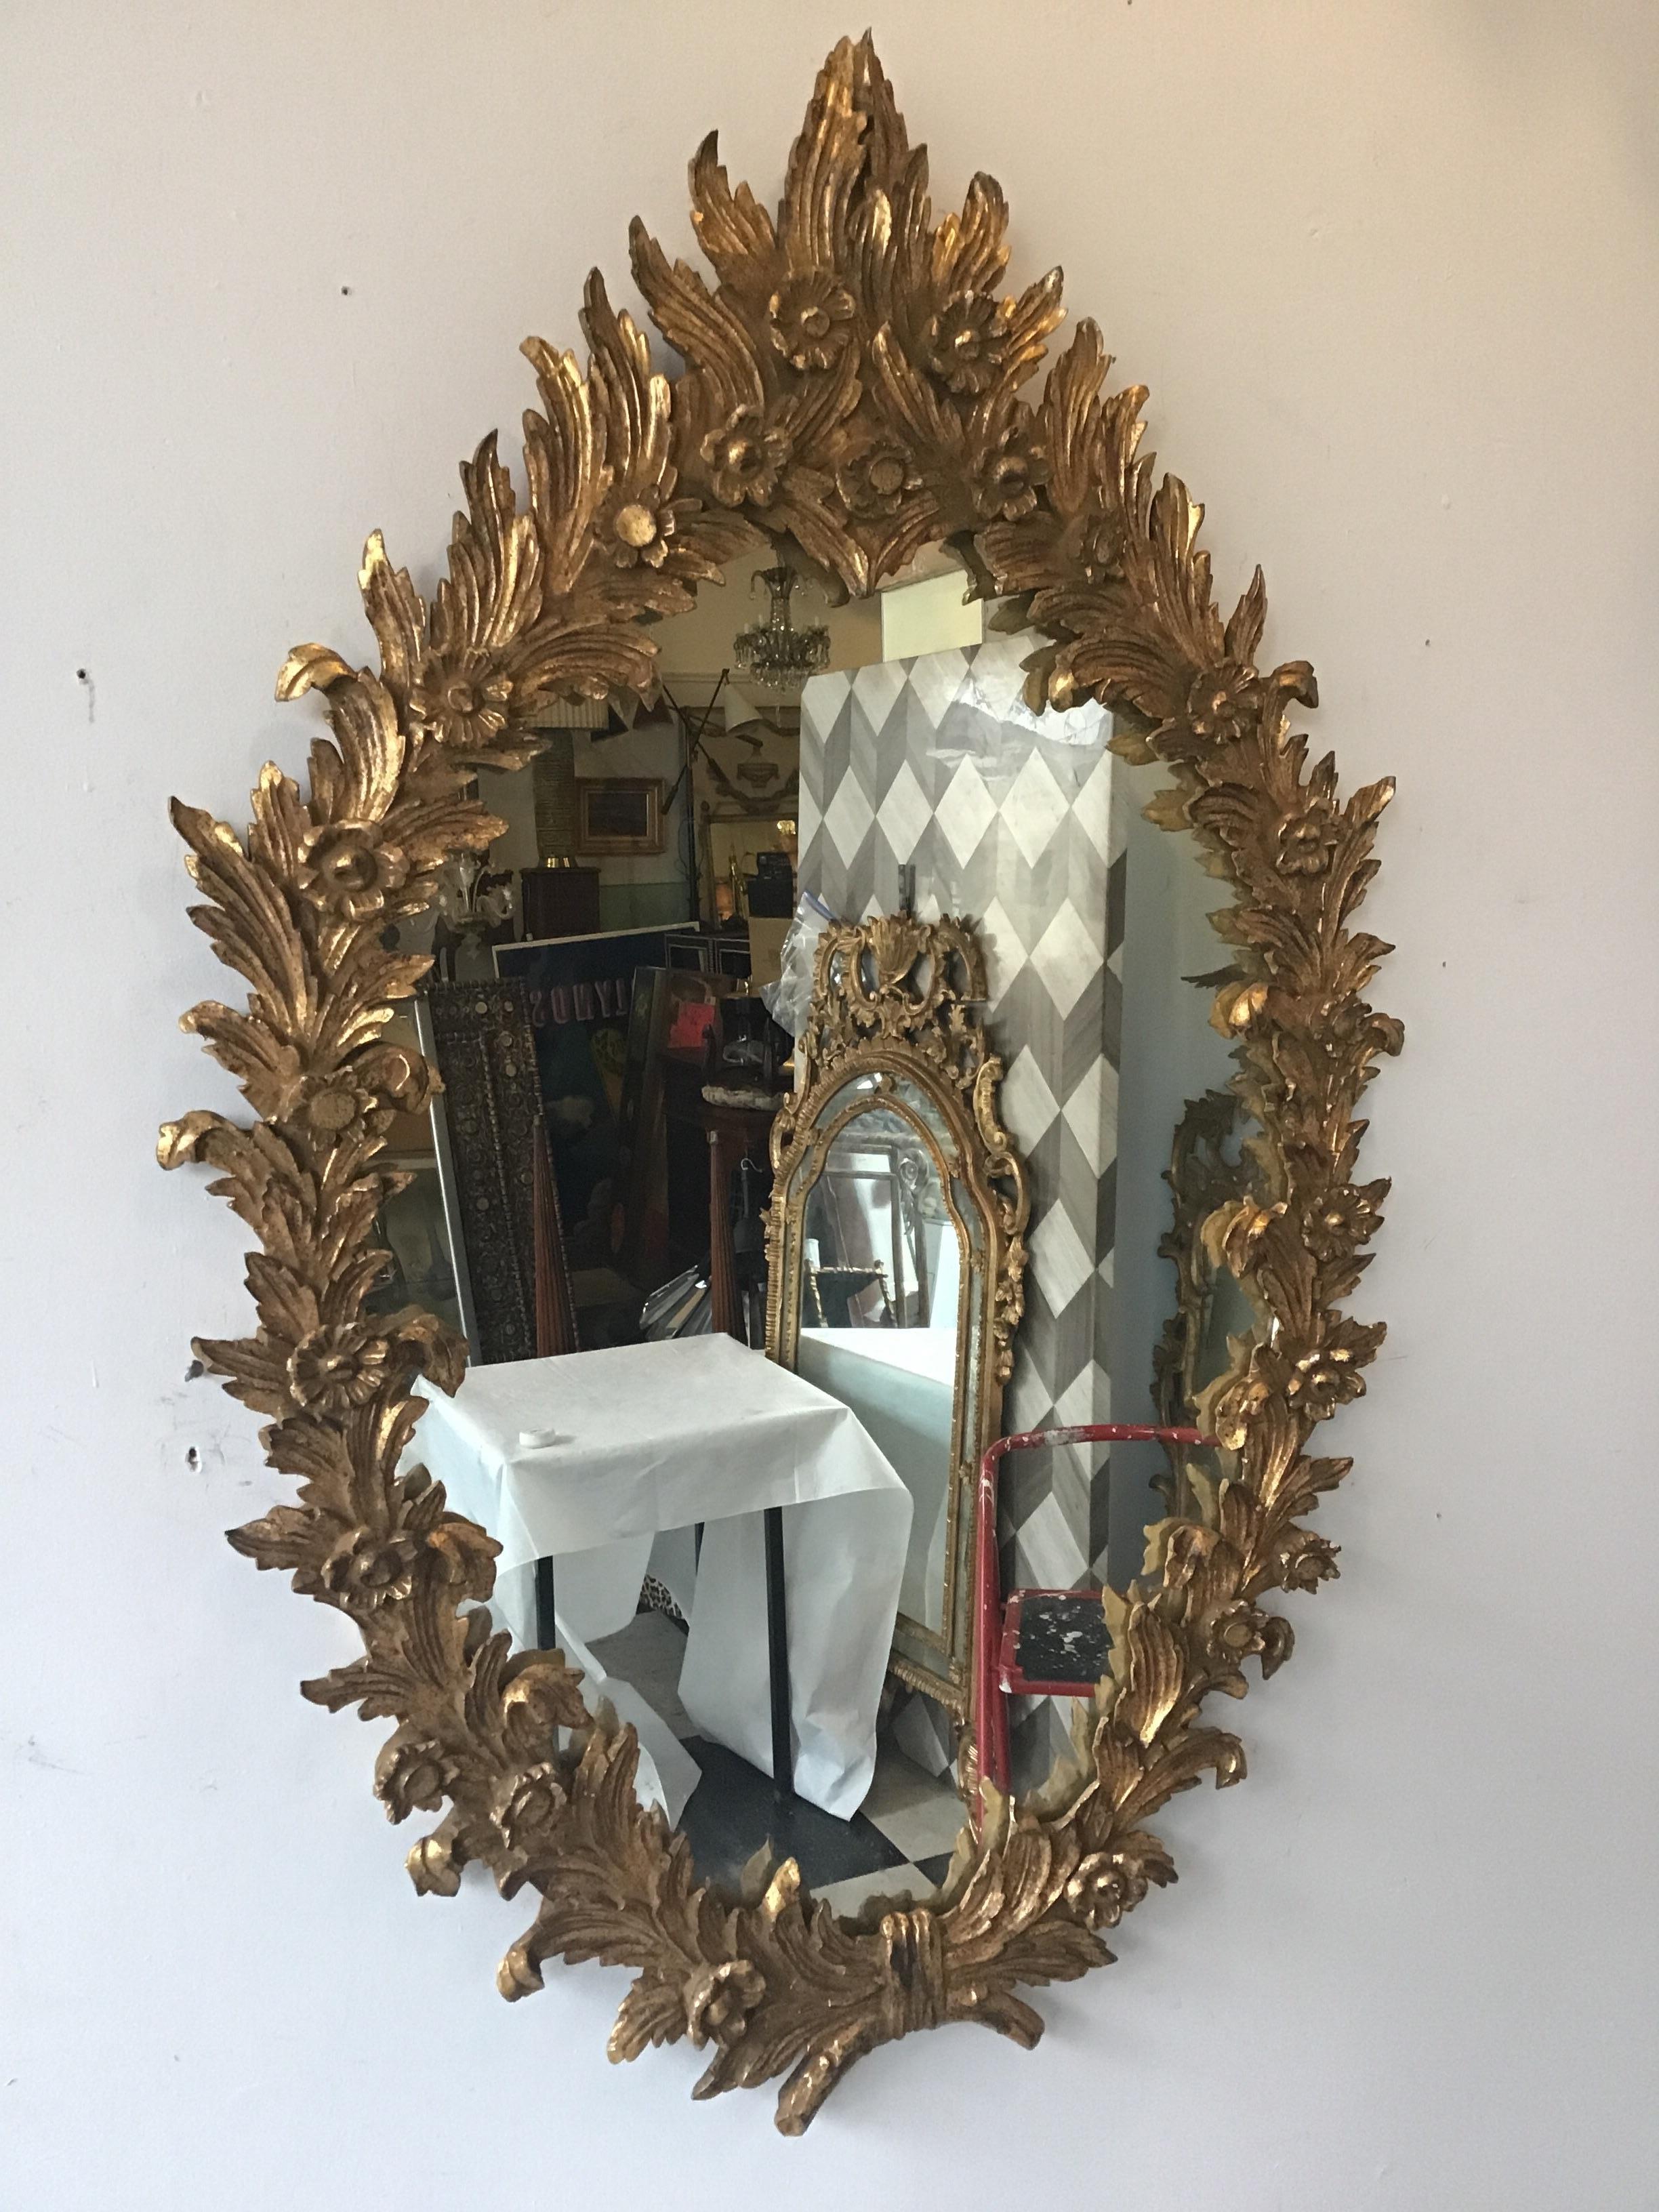 1960s large carved giltwood Italian mirror.
This item has a matching mirror to it, the reference number is LU 107825271163. It’s slightly different since it’s hand carved.